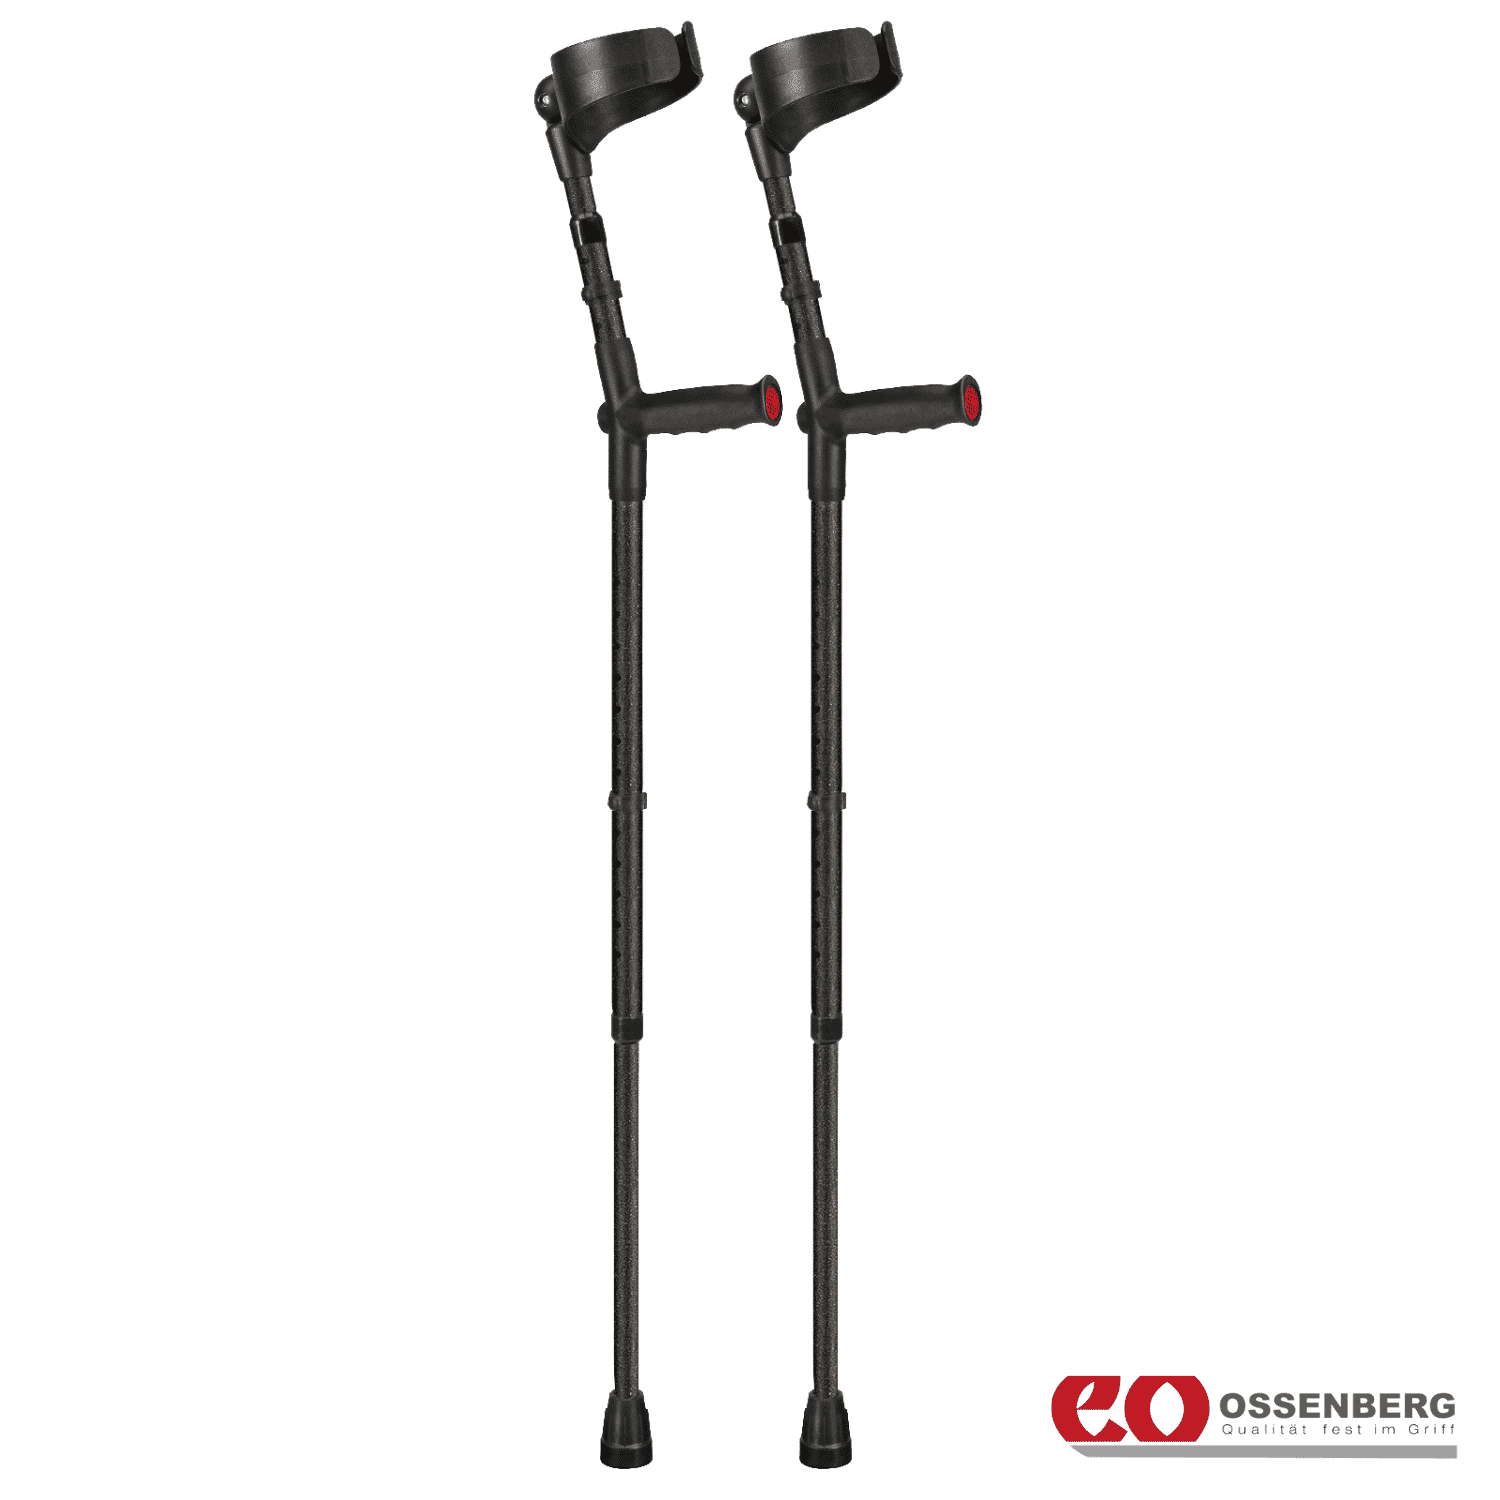 View Ossenberg Soft Grip Double Adjustable Crutches Black Pair information